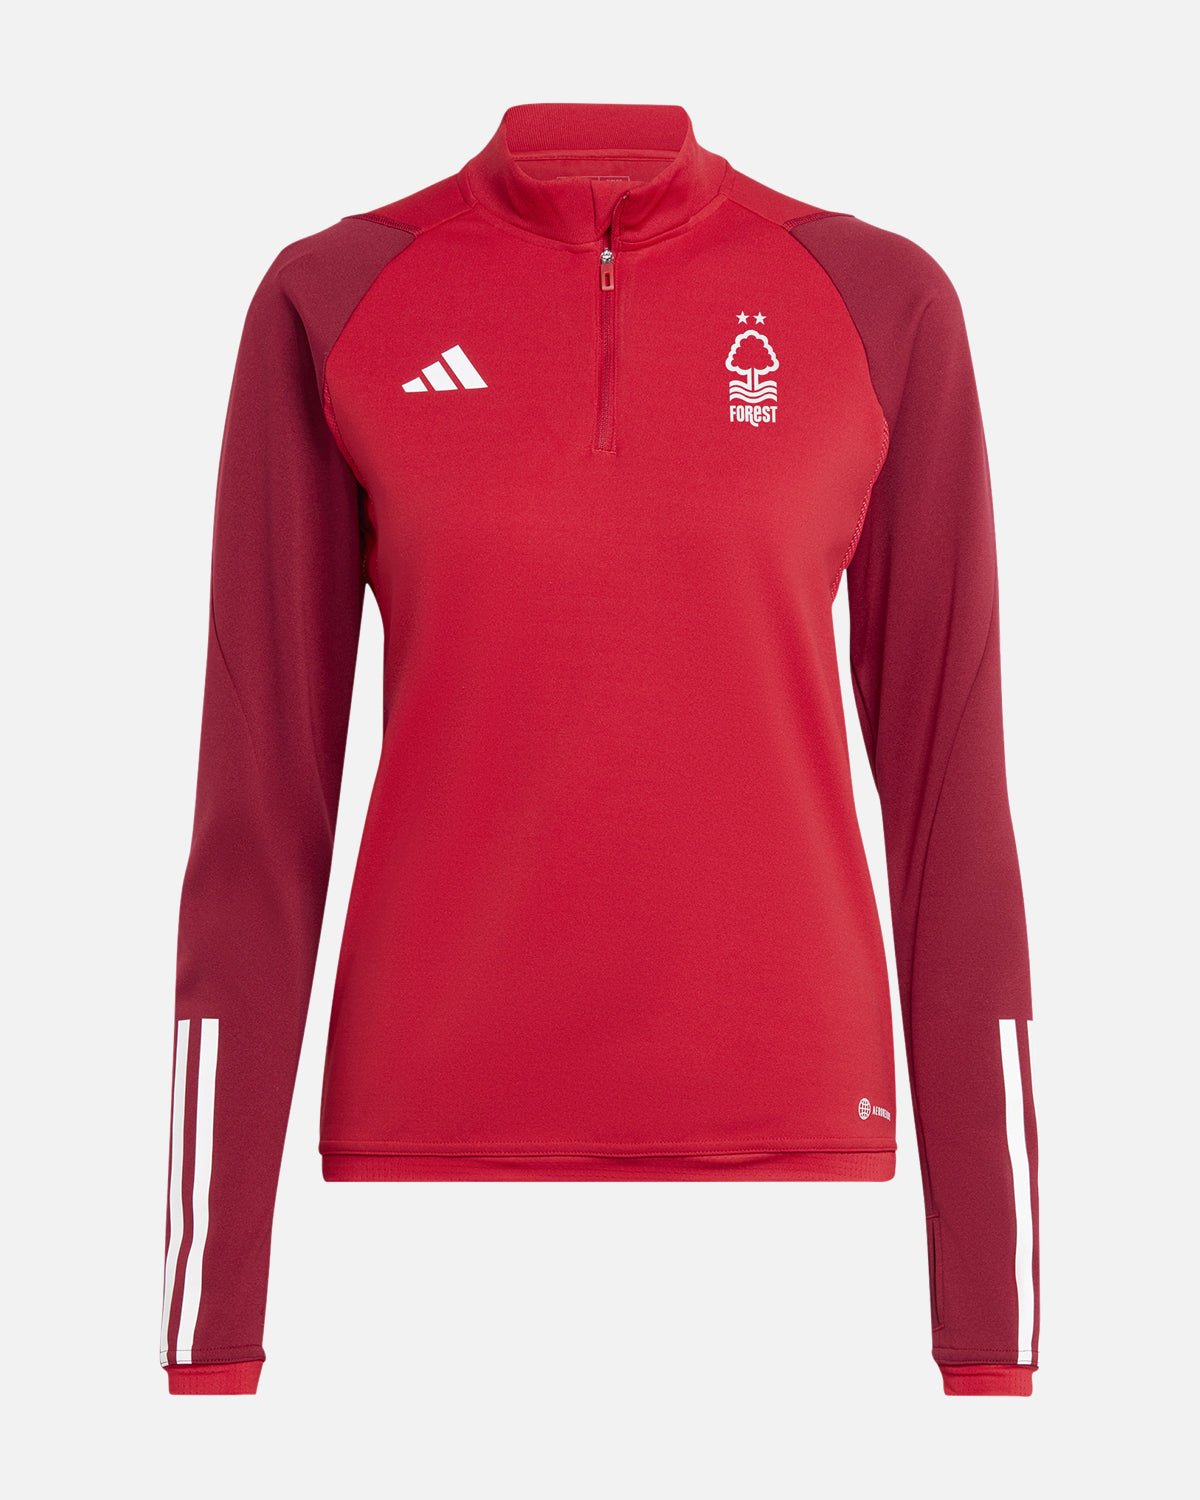 NFFC Women's Red Training Top 23-24 - Nottingham Forest FC